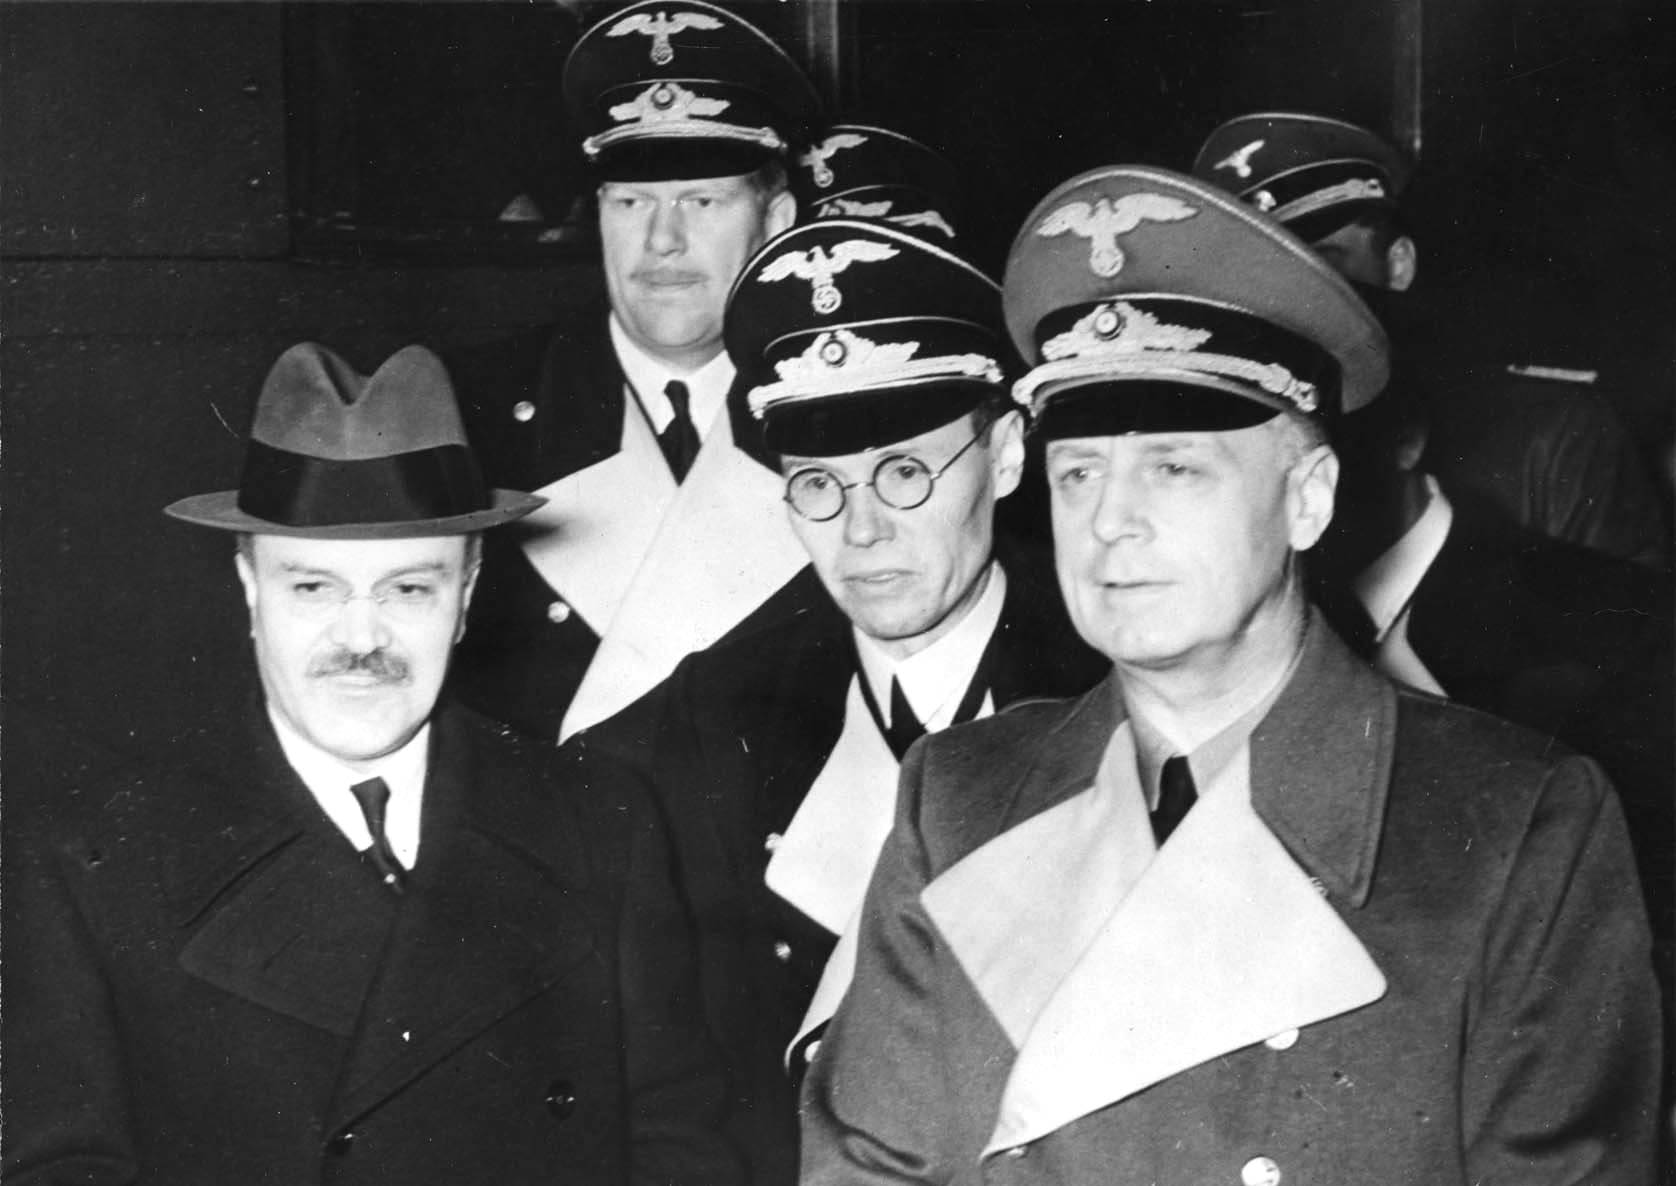 Vyacheslav Molotov and Joachim von Ribbentrop at Anhalter Station, Berlin, Germany, 14 Nov 1940. They are escorted by Foreign Office staff members Baron Alexander Von Dörnberg (2m tall) and Gustav Hilger (glasses)